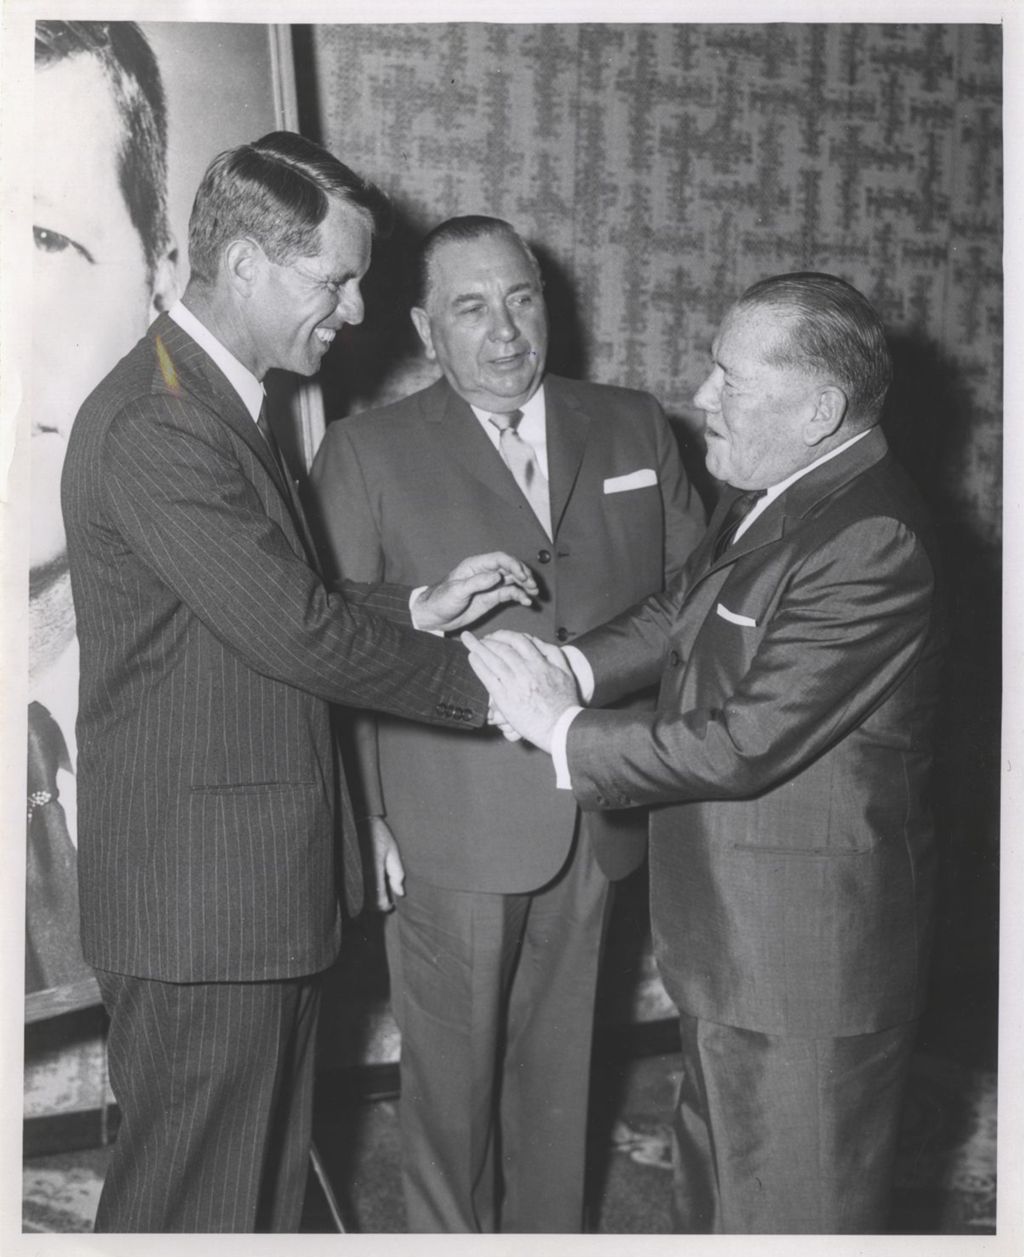 Robert F. Kennedy, P.J. Cullerton, and Richard J. Daley at an exhibition